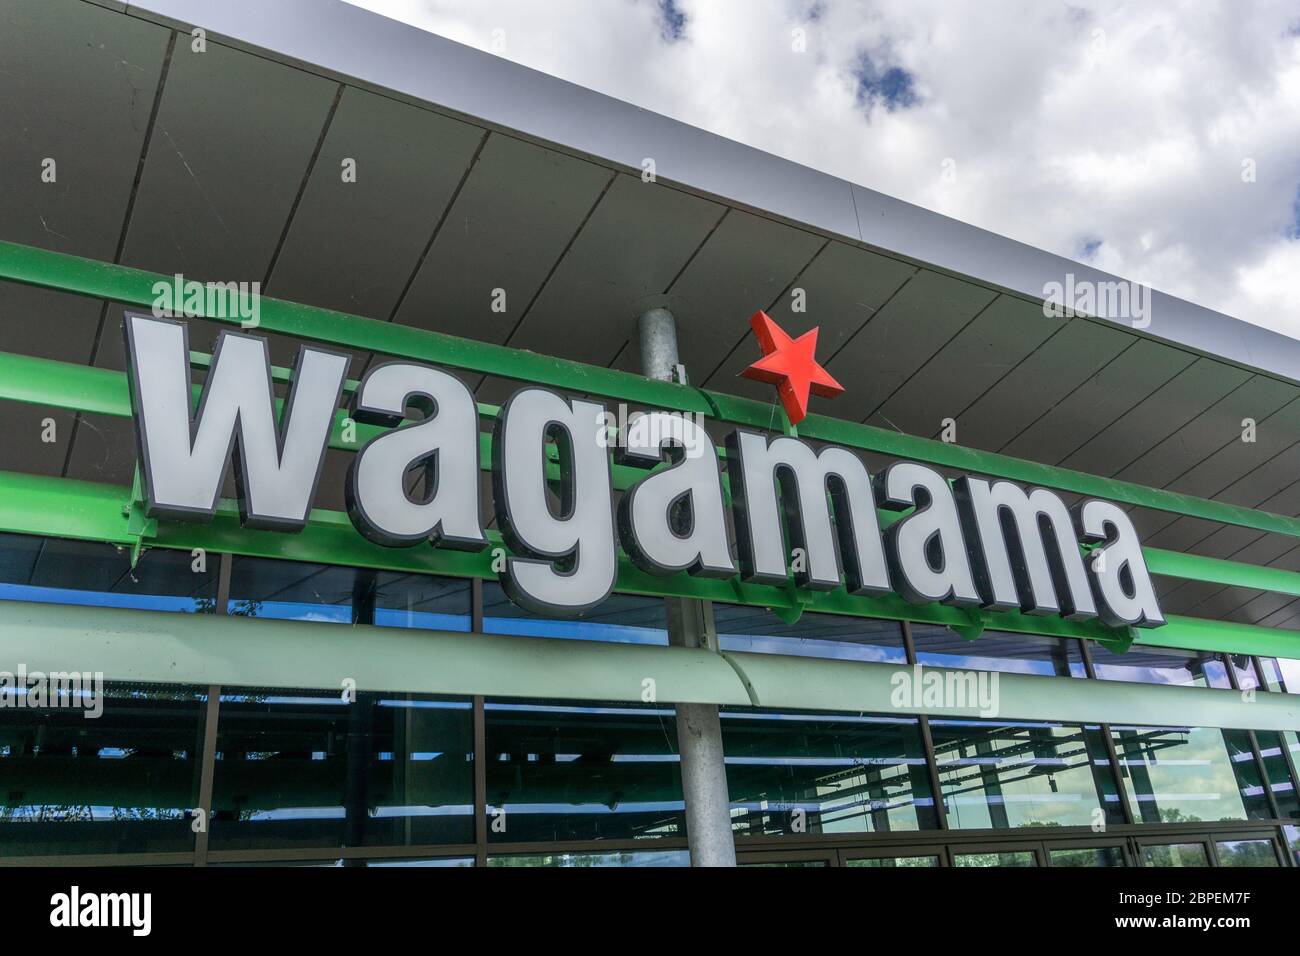 Sign for Wagamama, a Japanese style chain restaurant, Rushden Lakes, Northamptonshire Stock Photo